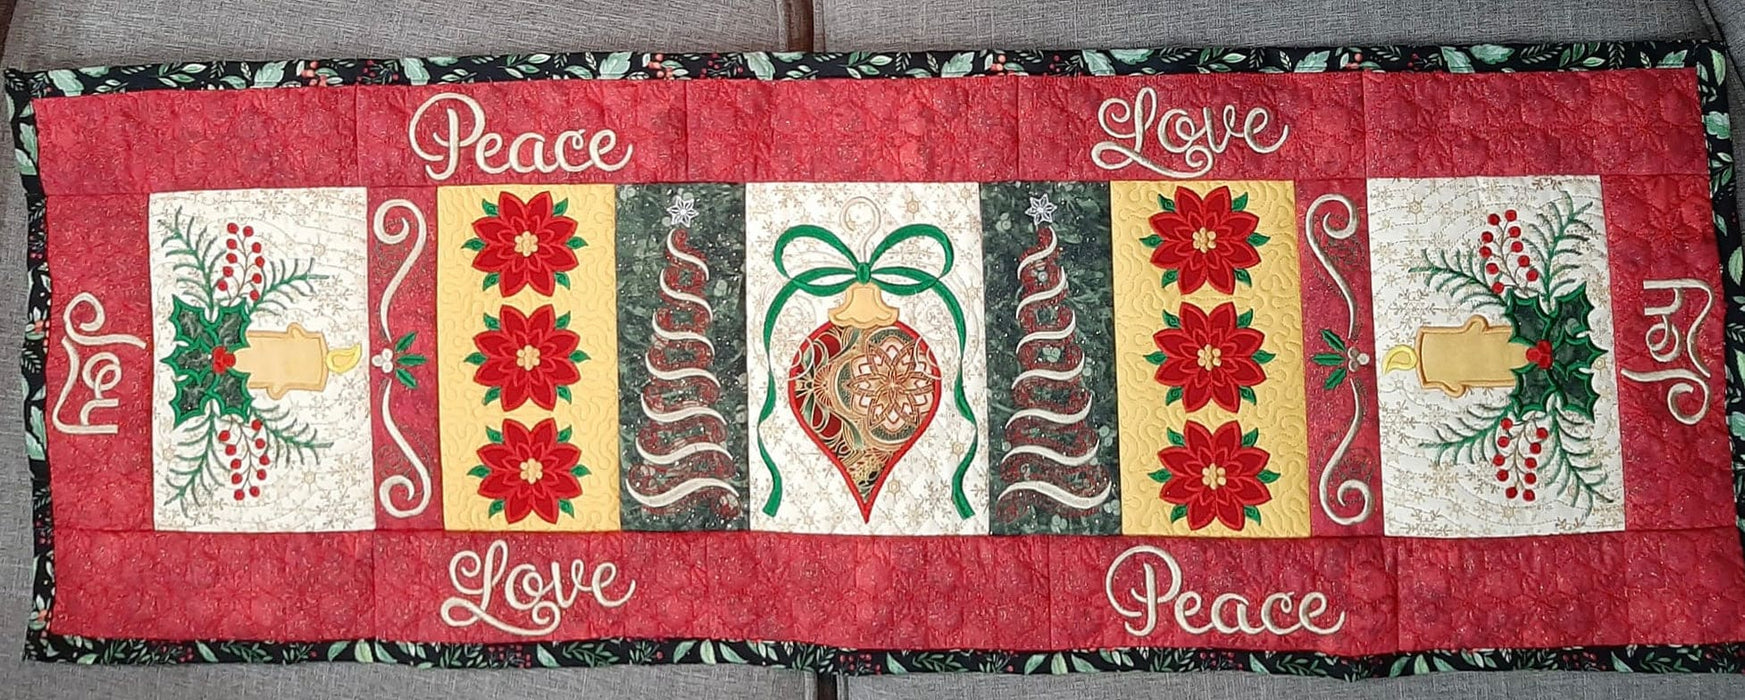 Christmas Table Runner Kit - Machine Embroidery - Red